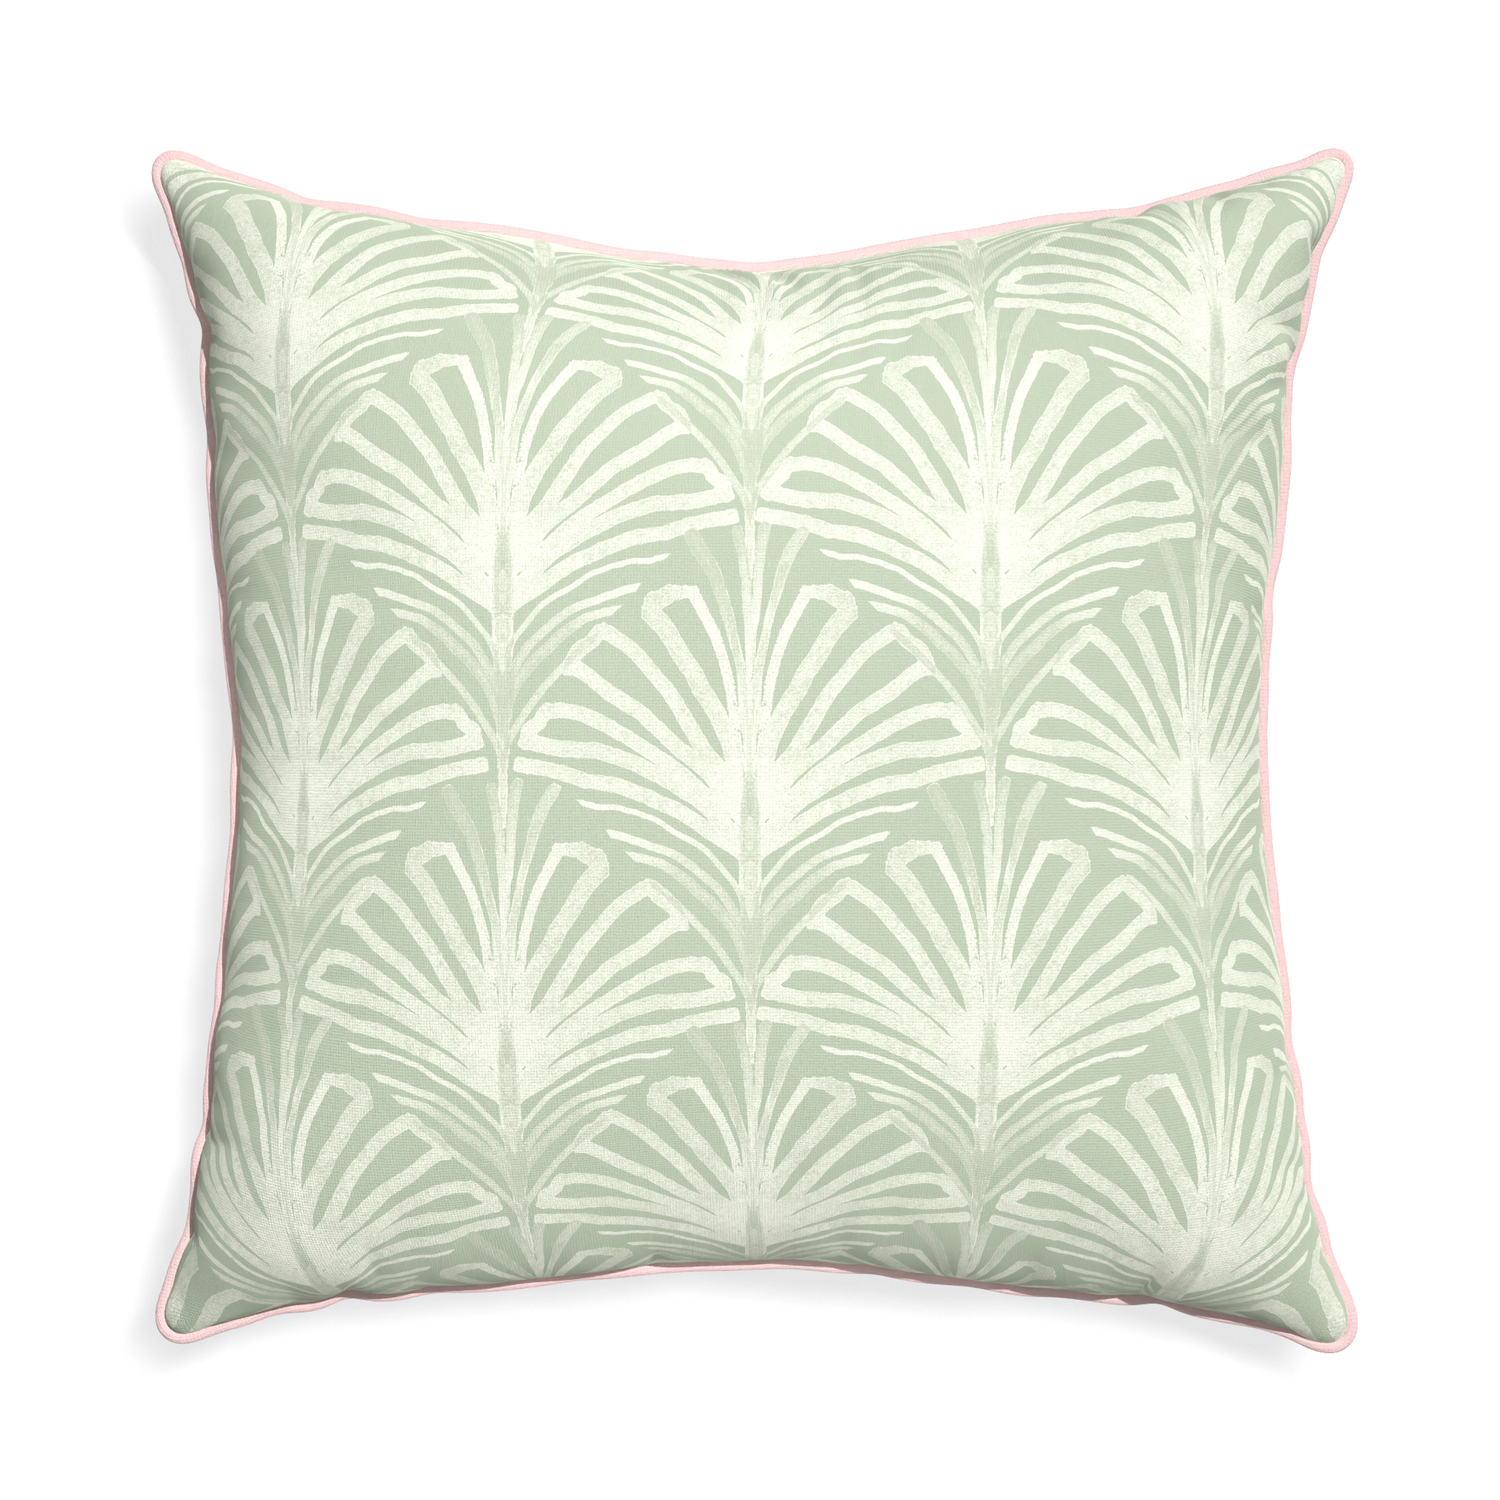 Euro-sham suzy sage custom sage green palmpillow with petal piping on white background